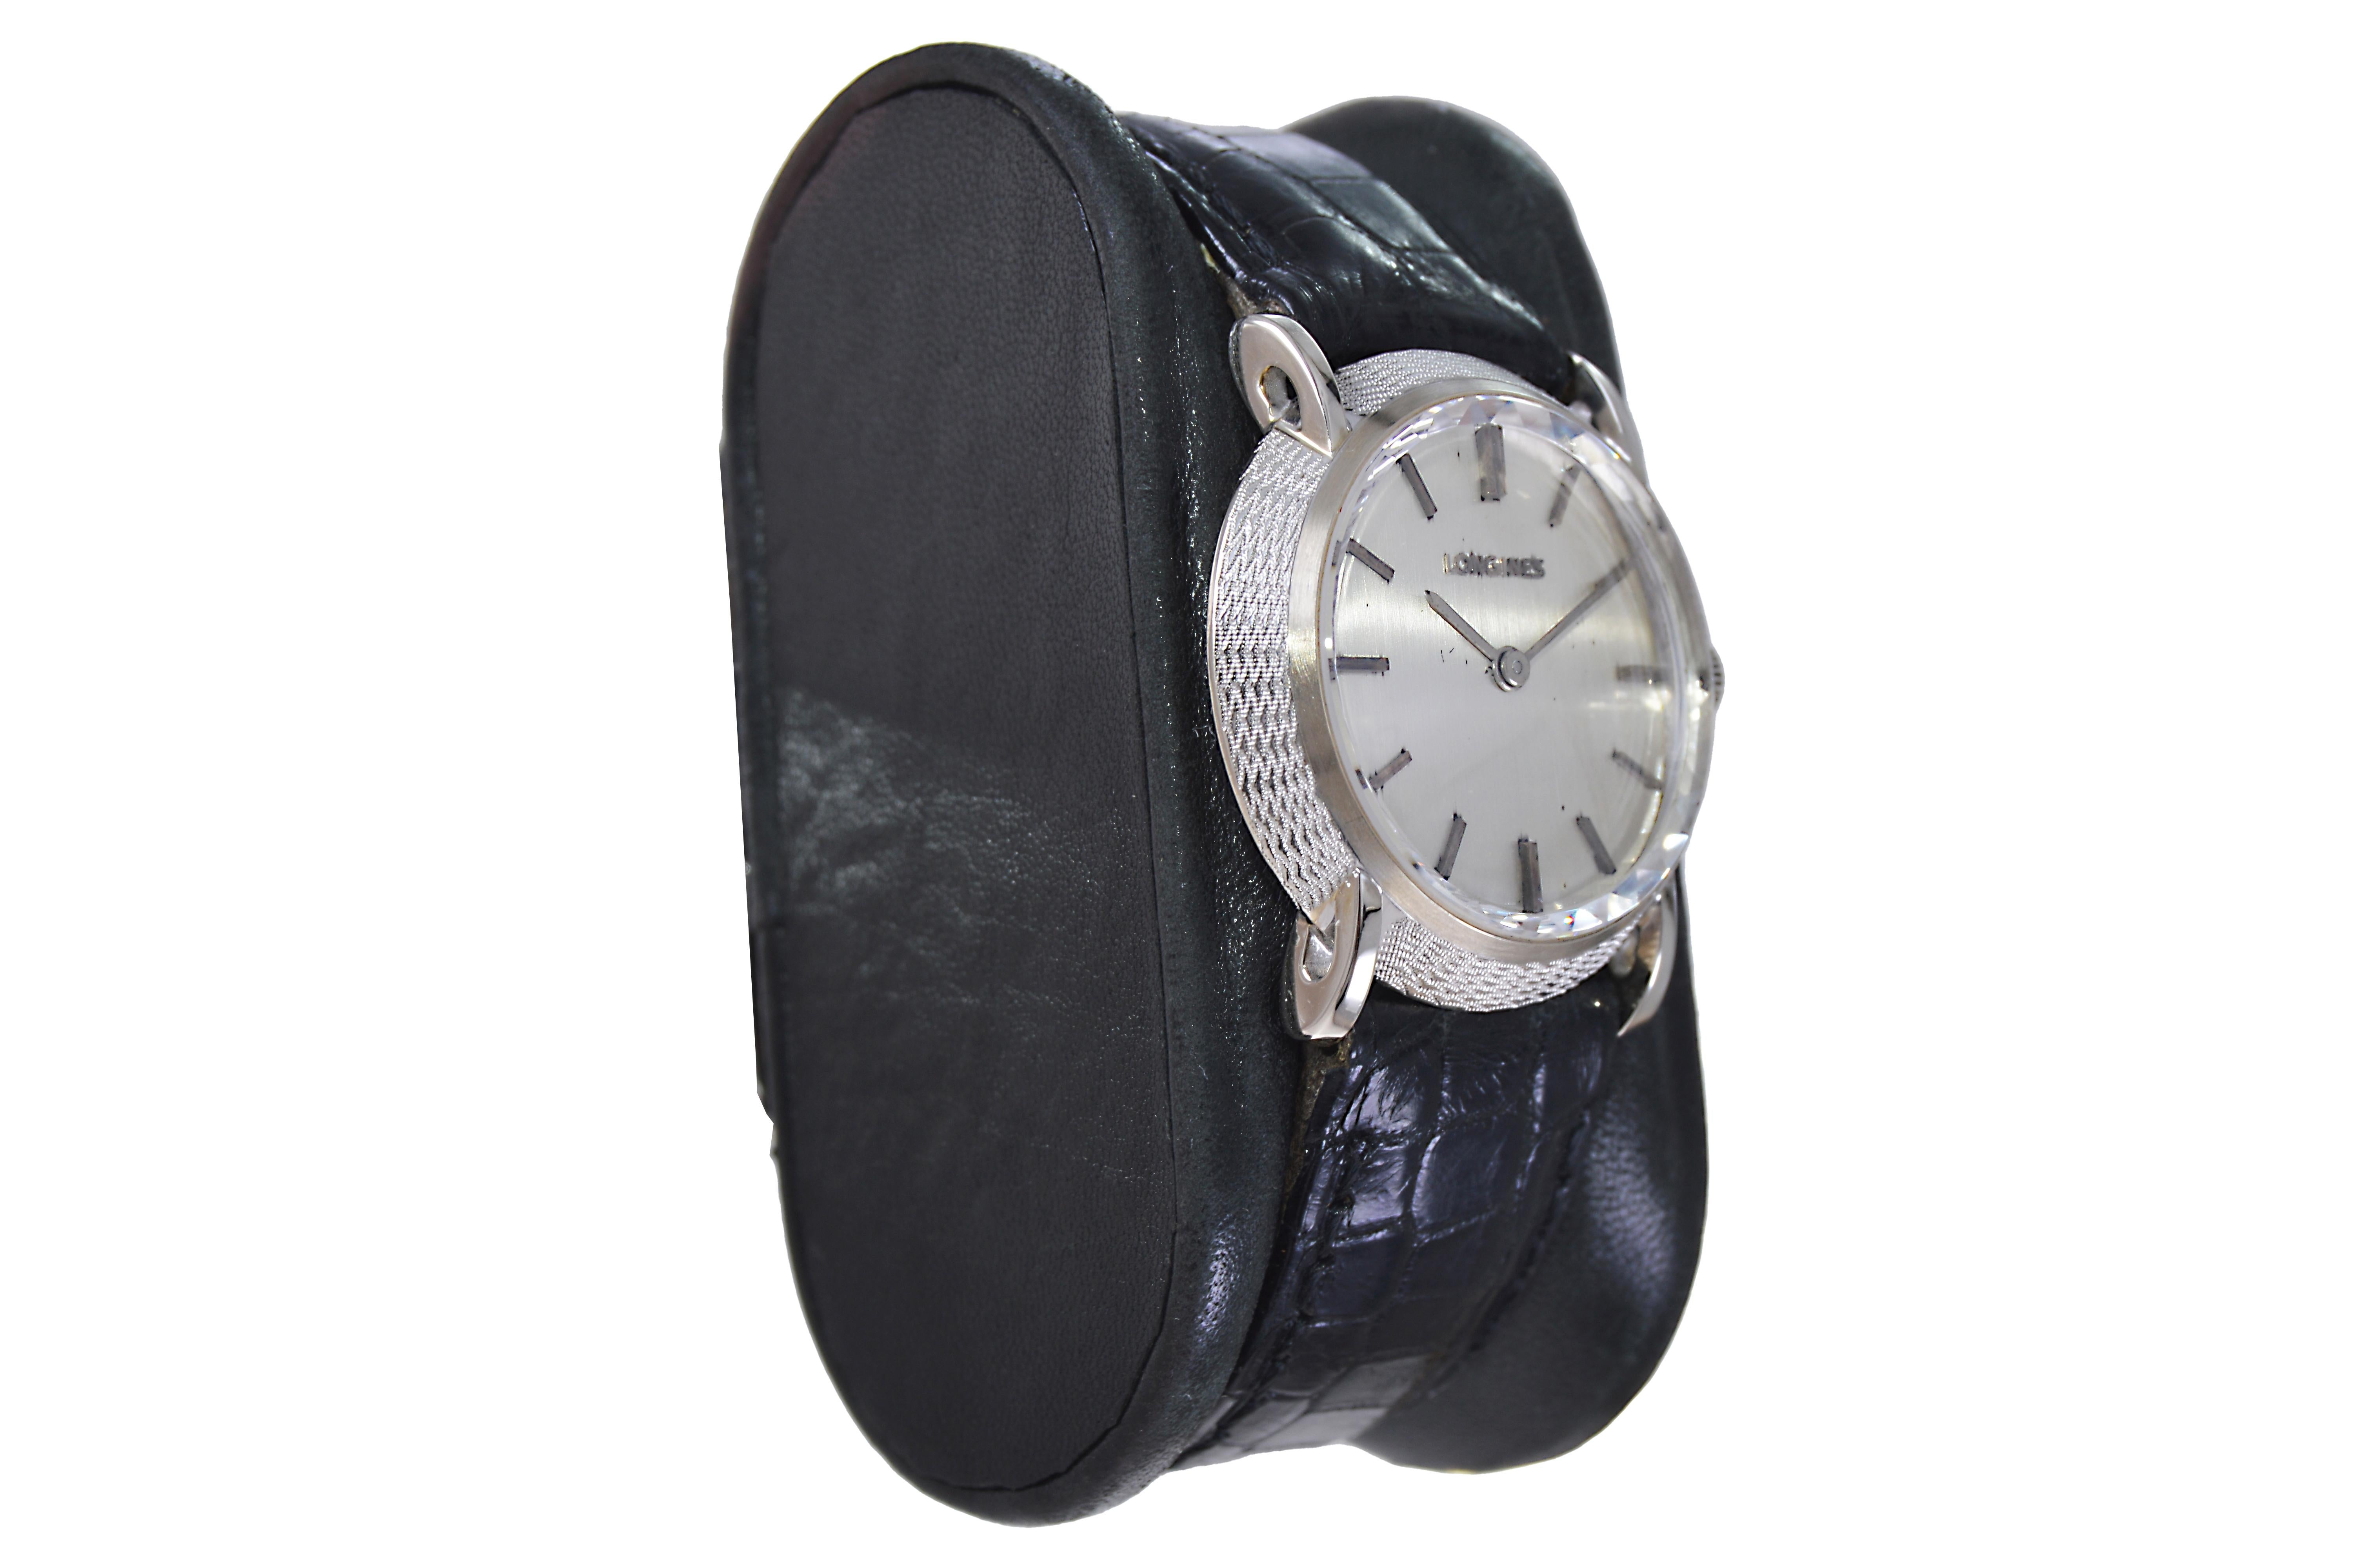 FACTORY / HOUSE: Longines Watch Company
STYLE / REFERENCE: Dress Model / Round
METAL / MATERIAL: 14Kt White Gold
DIMENSIONS:  Length 33mm  X  Diameter 30mm
CIRCA: Late 1950's / 60's
MOVEMENT / CALIBER: Manual Winding / 17 Jewels / Caliber 19.4
DIAL